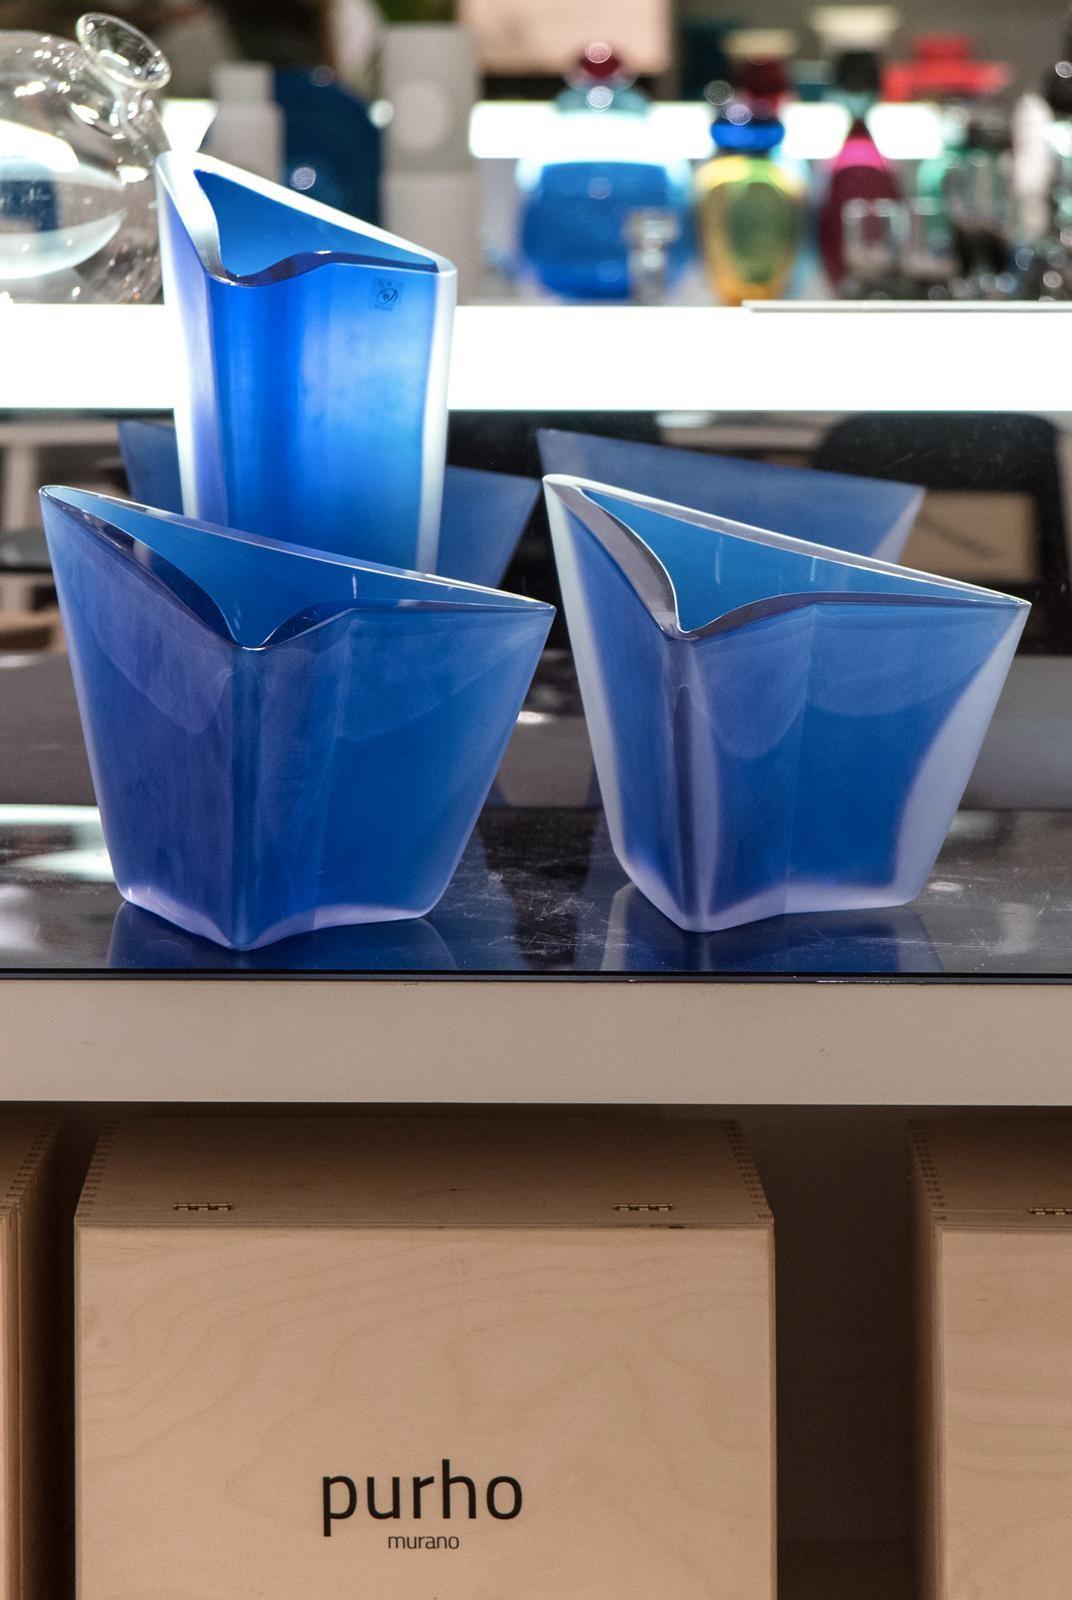 Set of 3 Freccia vases by Purho
Dimensions: D 25 x W 21 x H 36 cm/ D 25 x W 21 x H 16 cm.
Materials: Glass
Other colors and dimensions are available.

Purho is a new protagonist of made in Italy design, a work of synthesis, a research that has